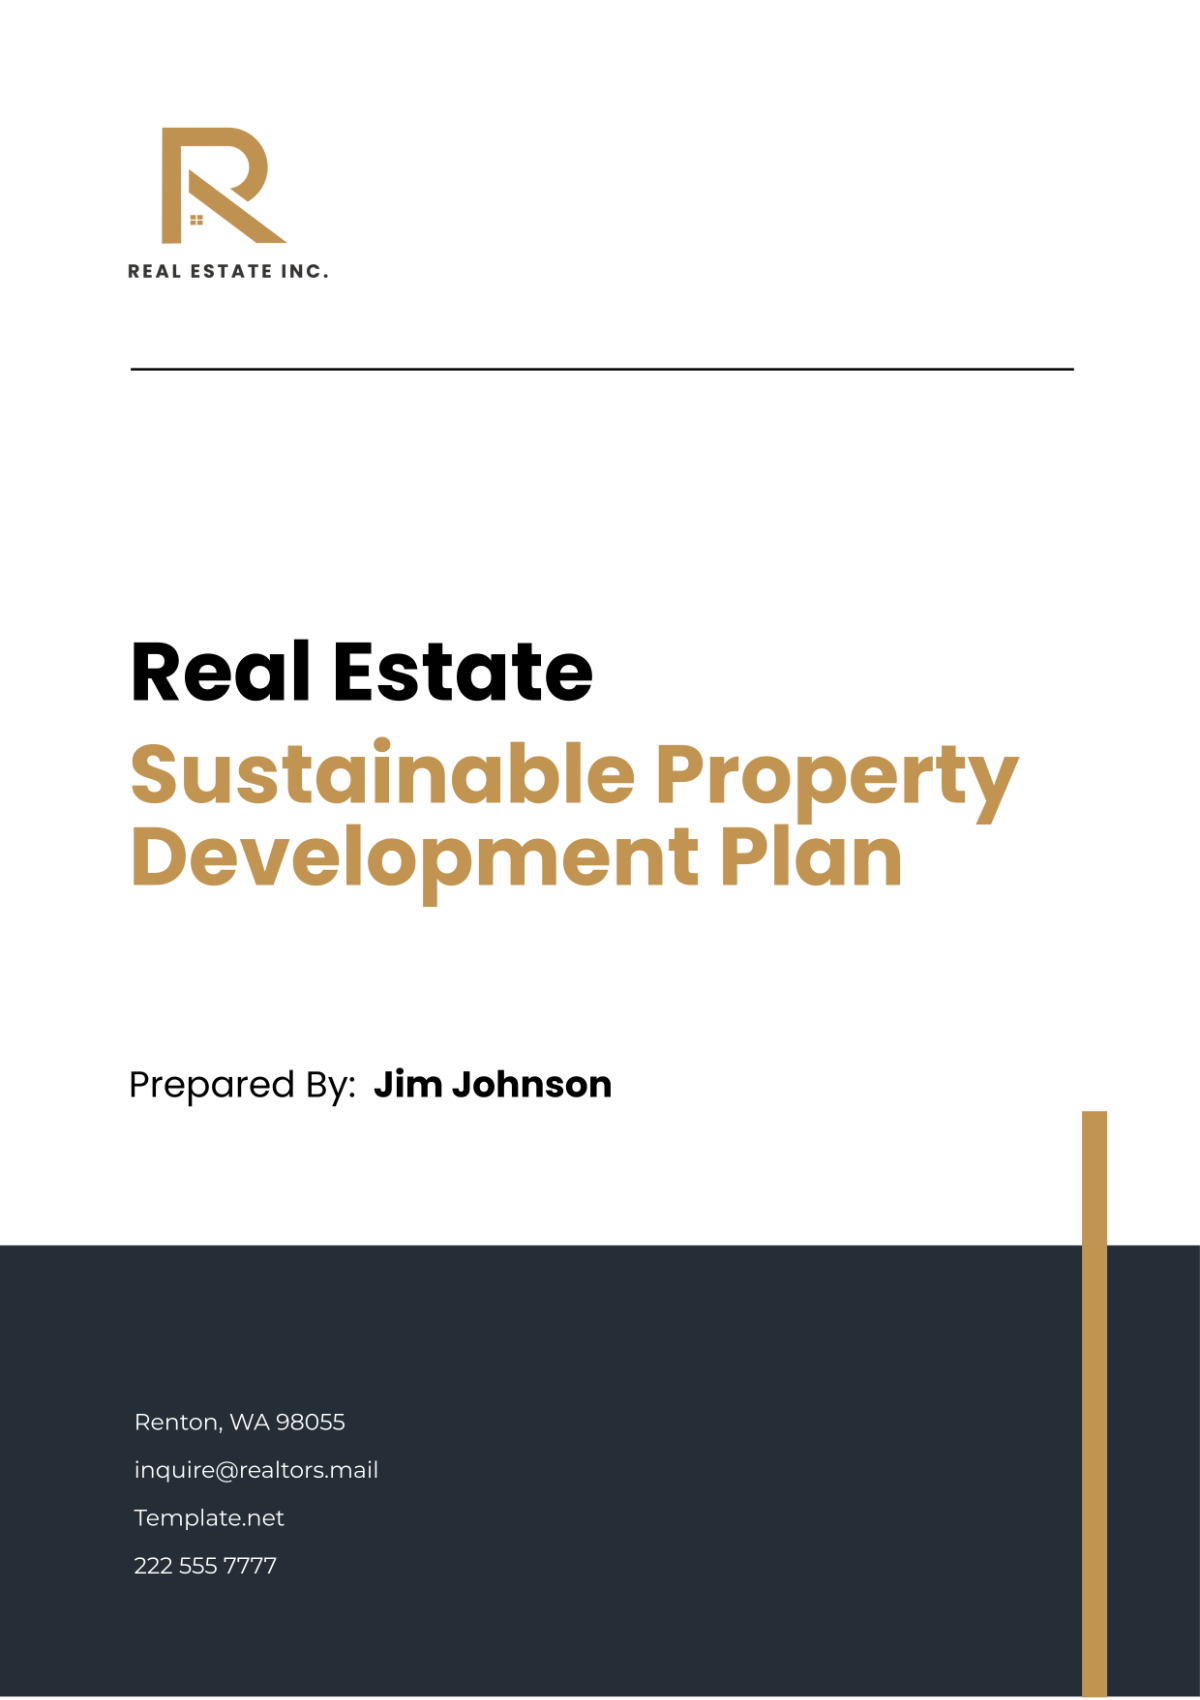 Real Estate Sustainable Property Development Plan Template